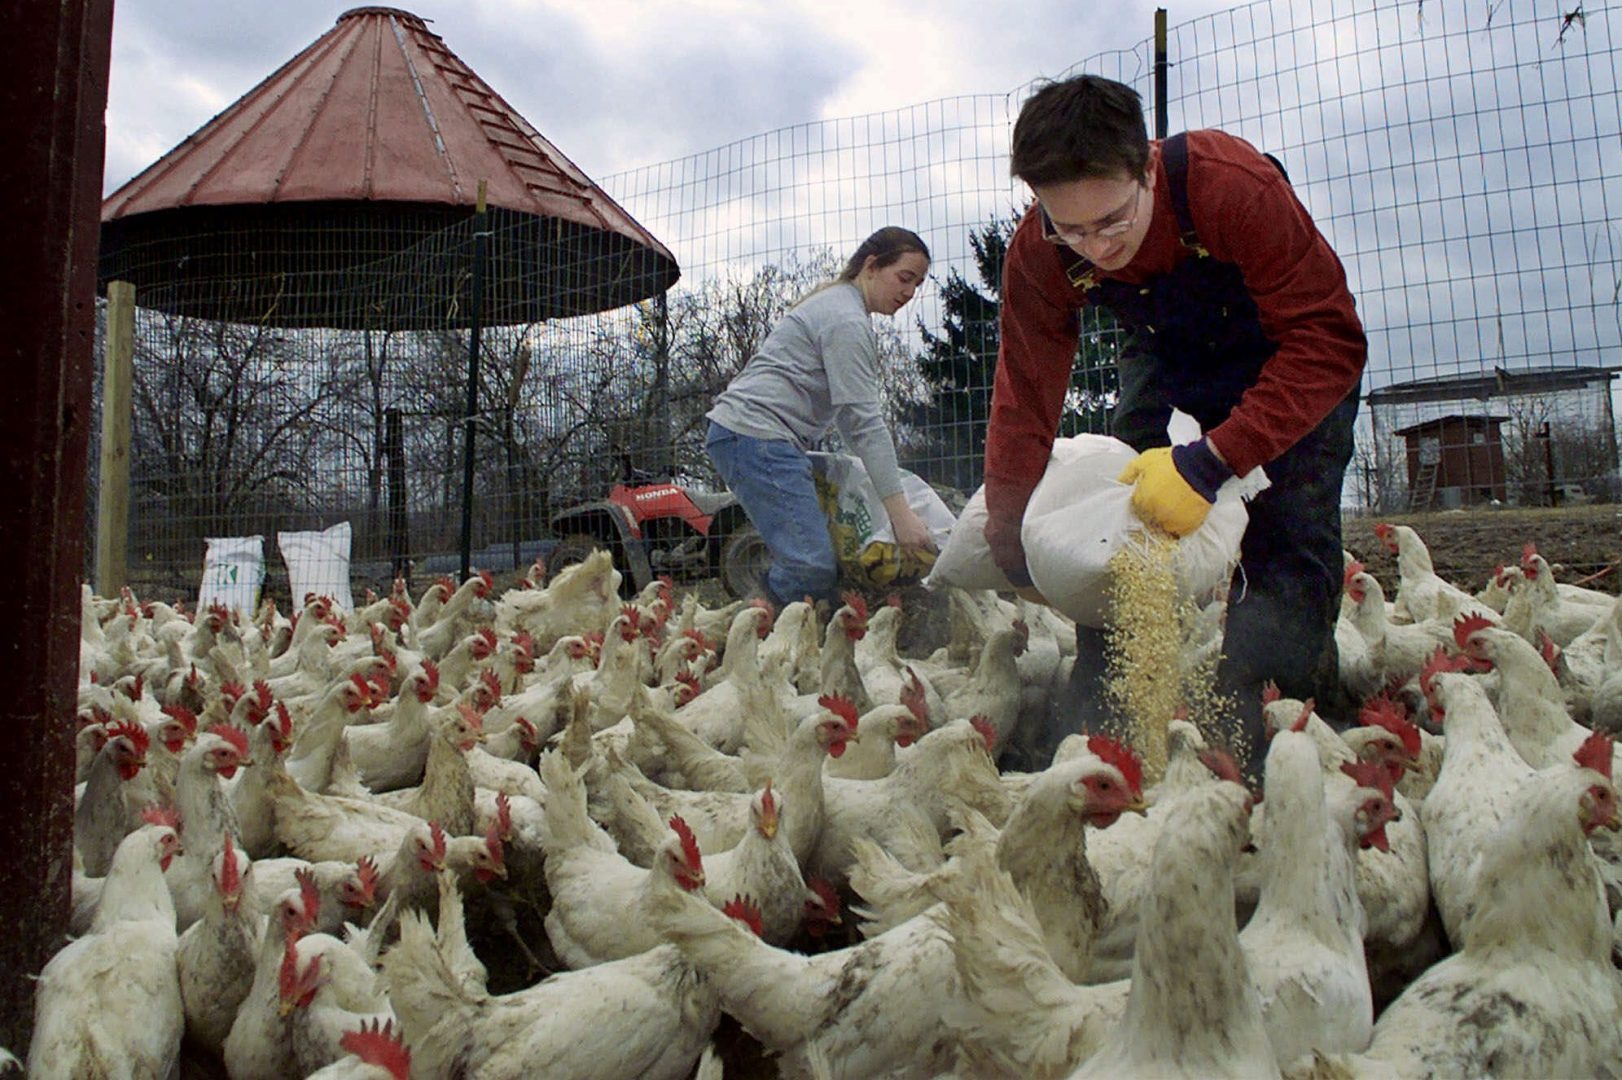 Cayce Mell, left, and Jason Tracy spread feed amid their flock of chickens saved from the tornado-devastated Buckeye Egg megafarm in Croton, Ohio, in September 2000, at their Ooh-Mah-Nee Farm animal sanctuary in Hunker, Pa., on Monday, Feb. 5, 2001.  